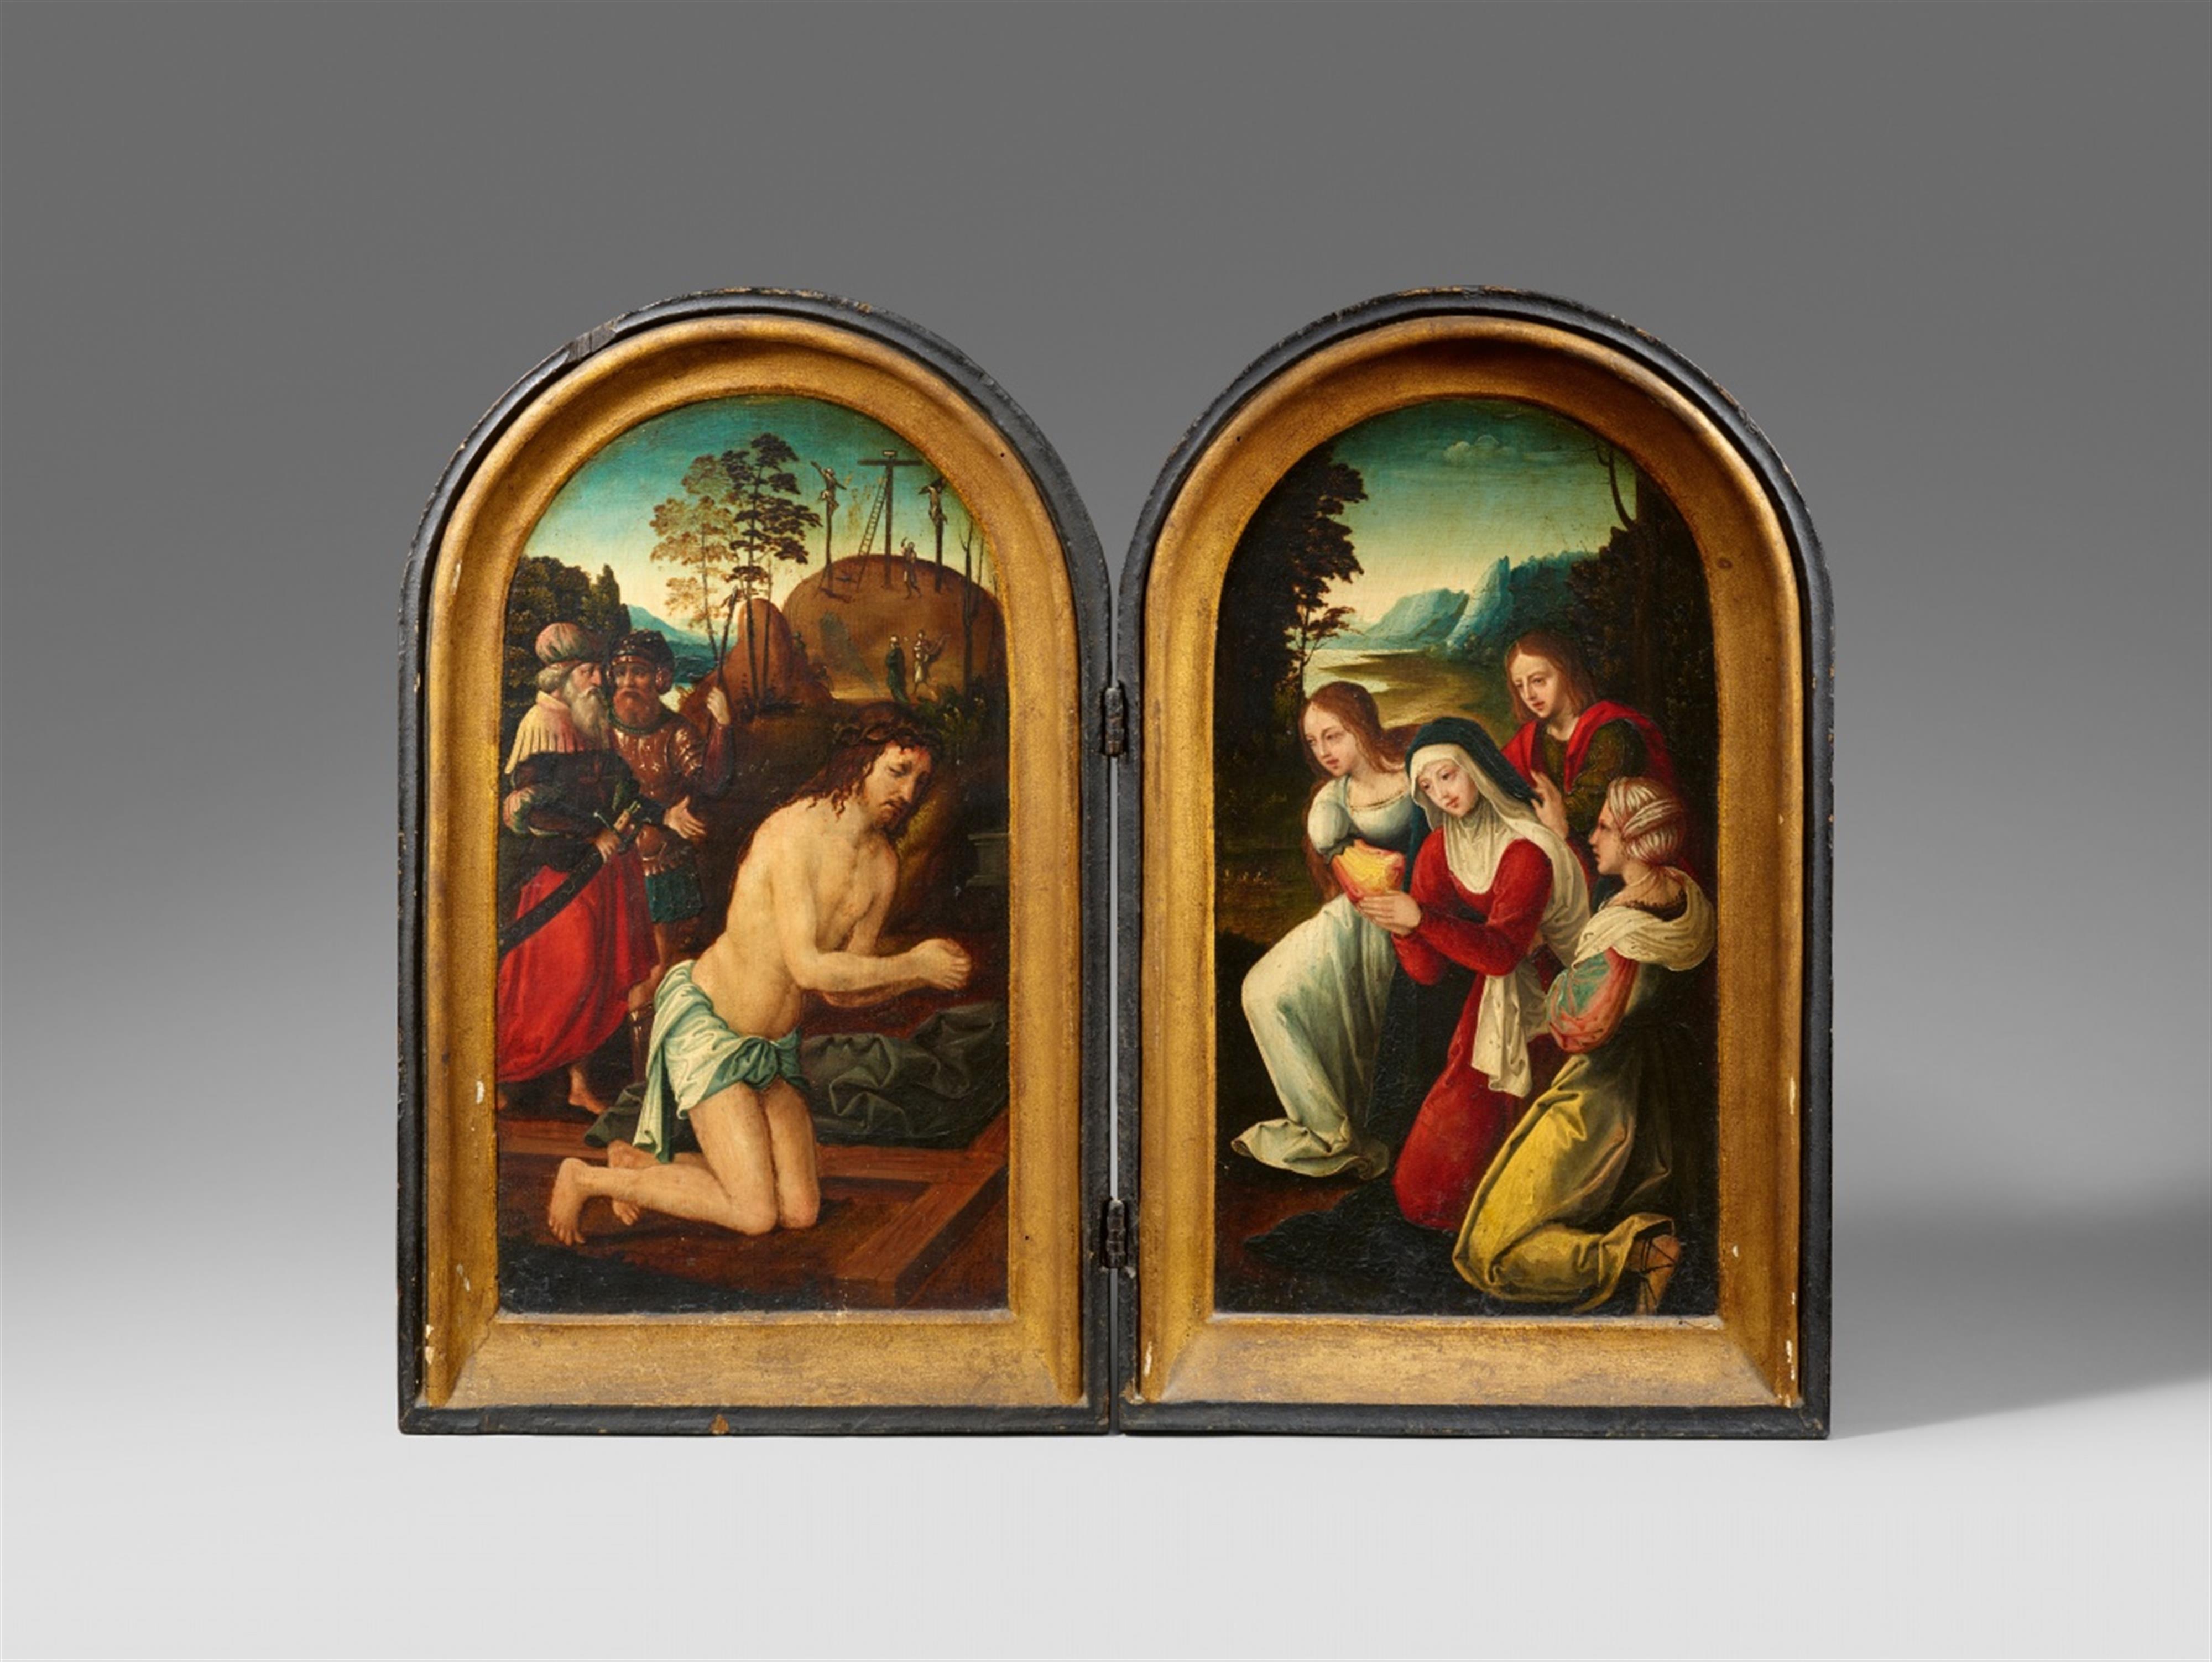 Netherlandish School 16th century - Diptych with Scenes from the Passion - image-1